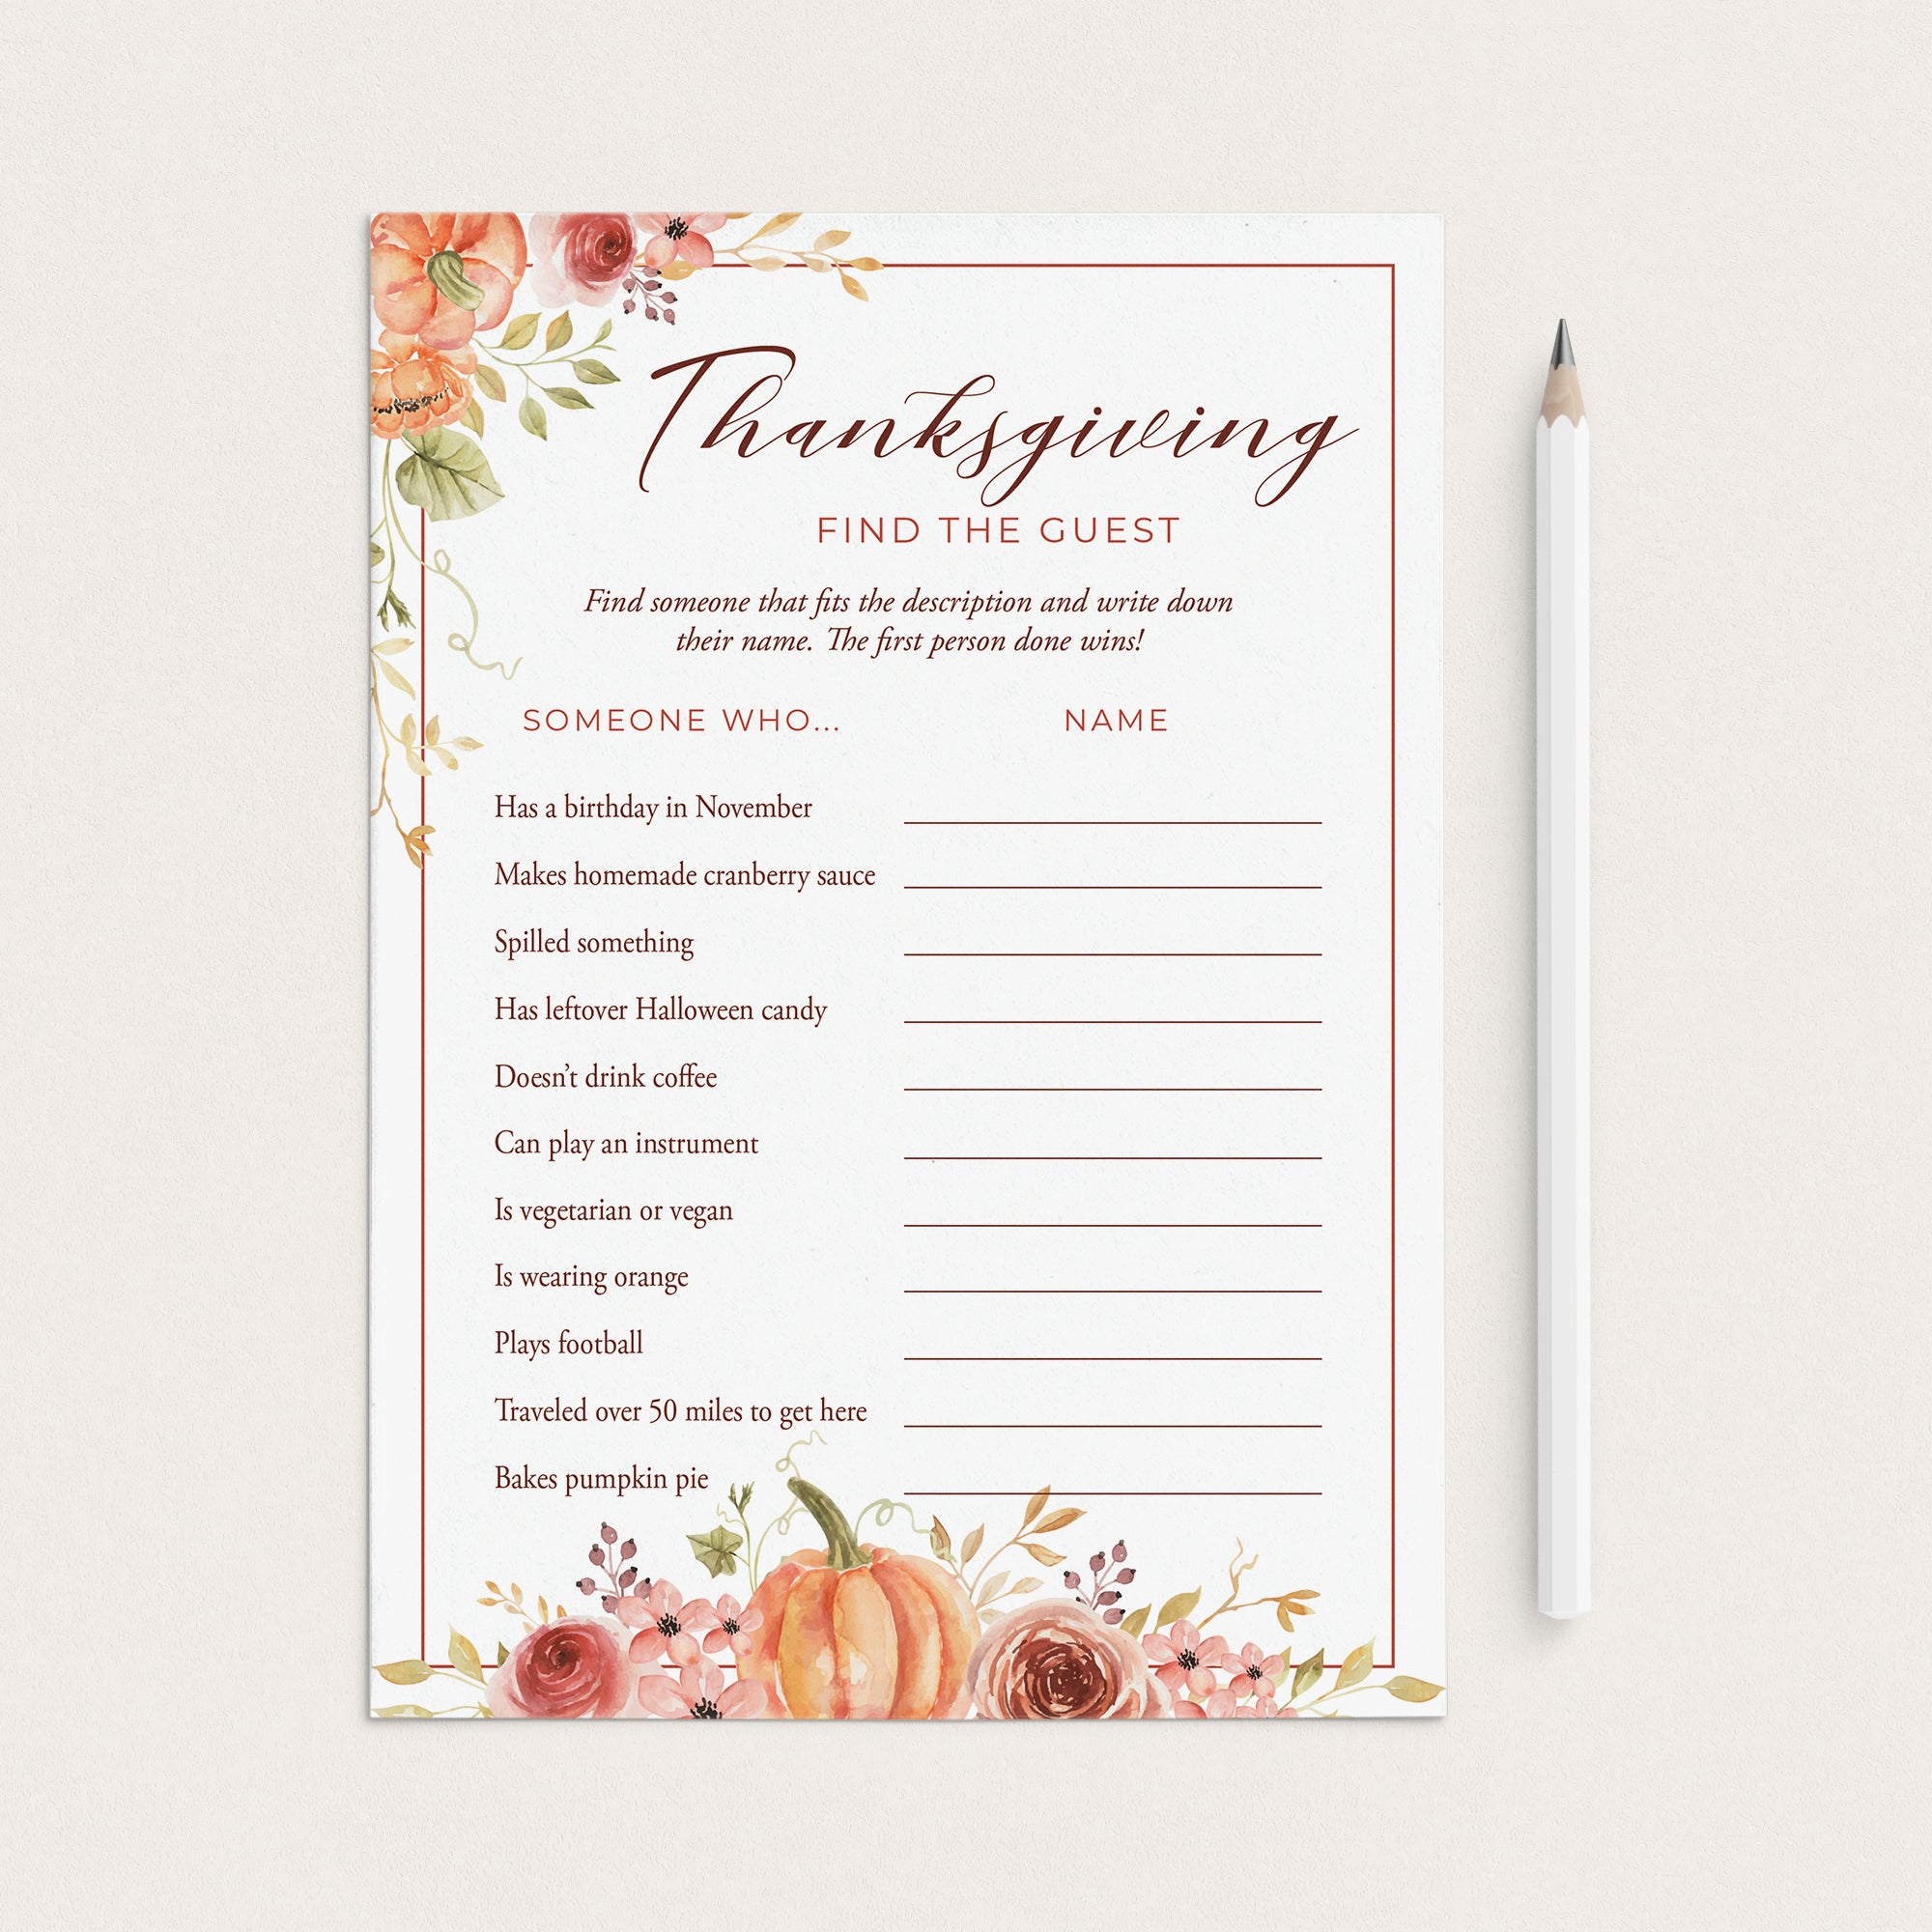 Thanksgiving Find The Guest Game Card Printable by LittleSizzle